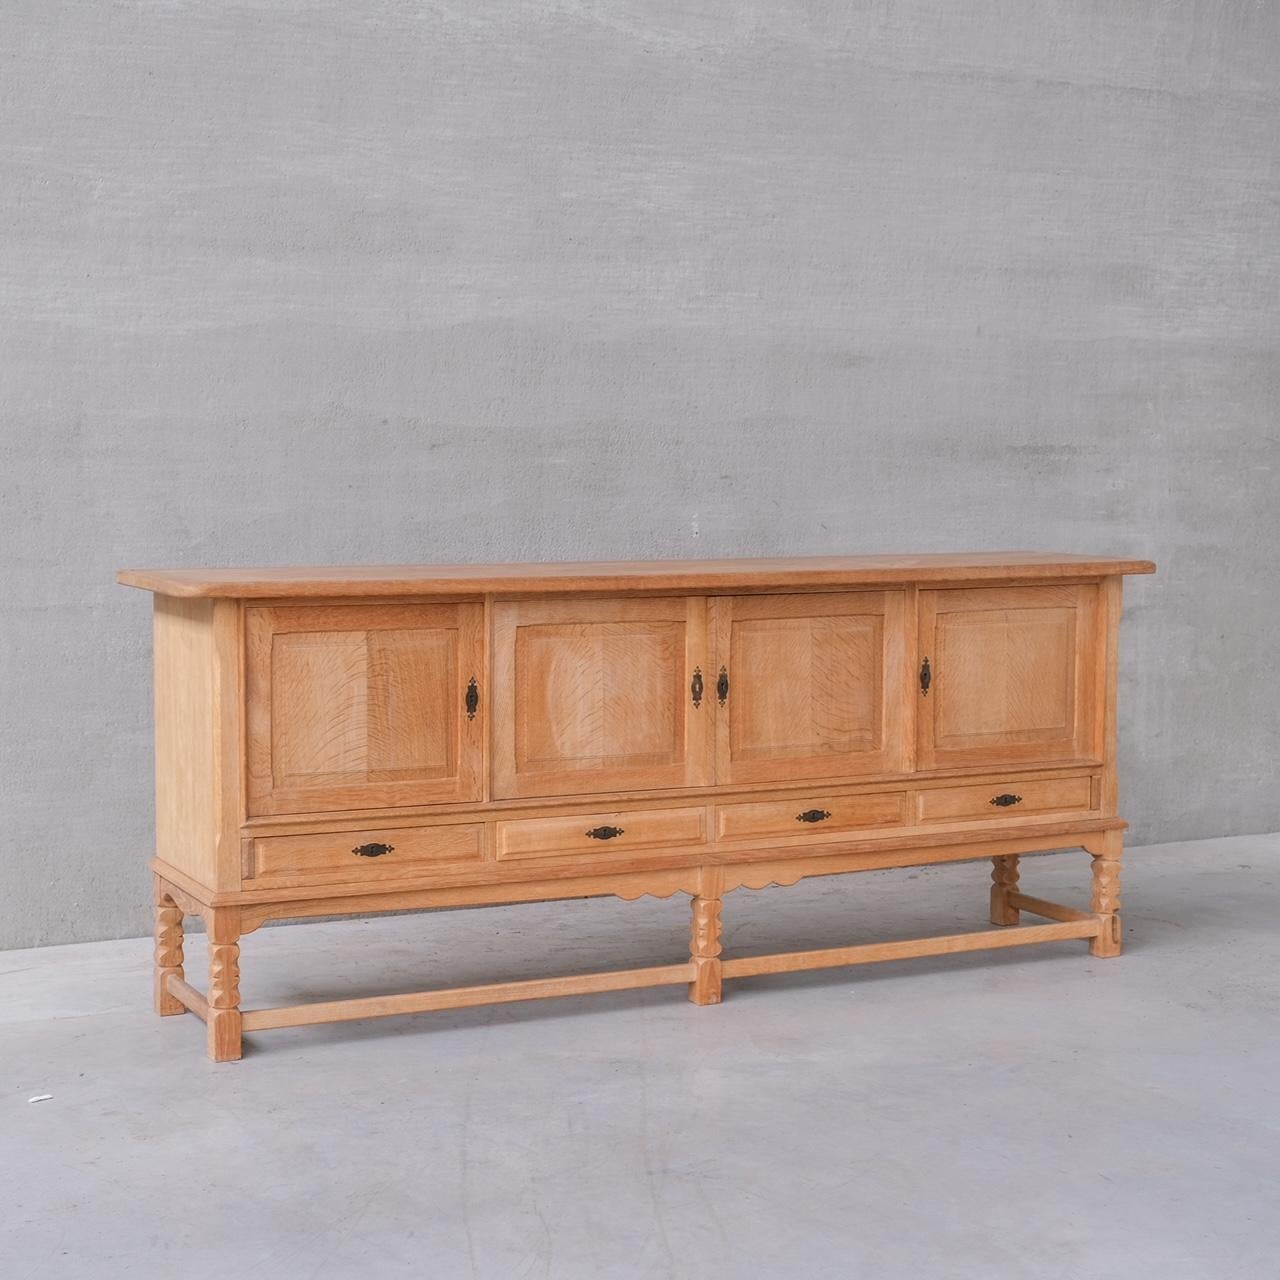 An oak sideboard by Henning (Henry) Kjaernulf.

Denmark, c1960s.

Cabinet doors over drawers.

Good vintage condition, some scuffs and wear commensurate with age.

Internal ref: 12/9/23/029.

Location: Belgium Gallery.

Dimensions: 91 H x 226 W x 50